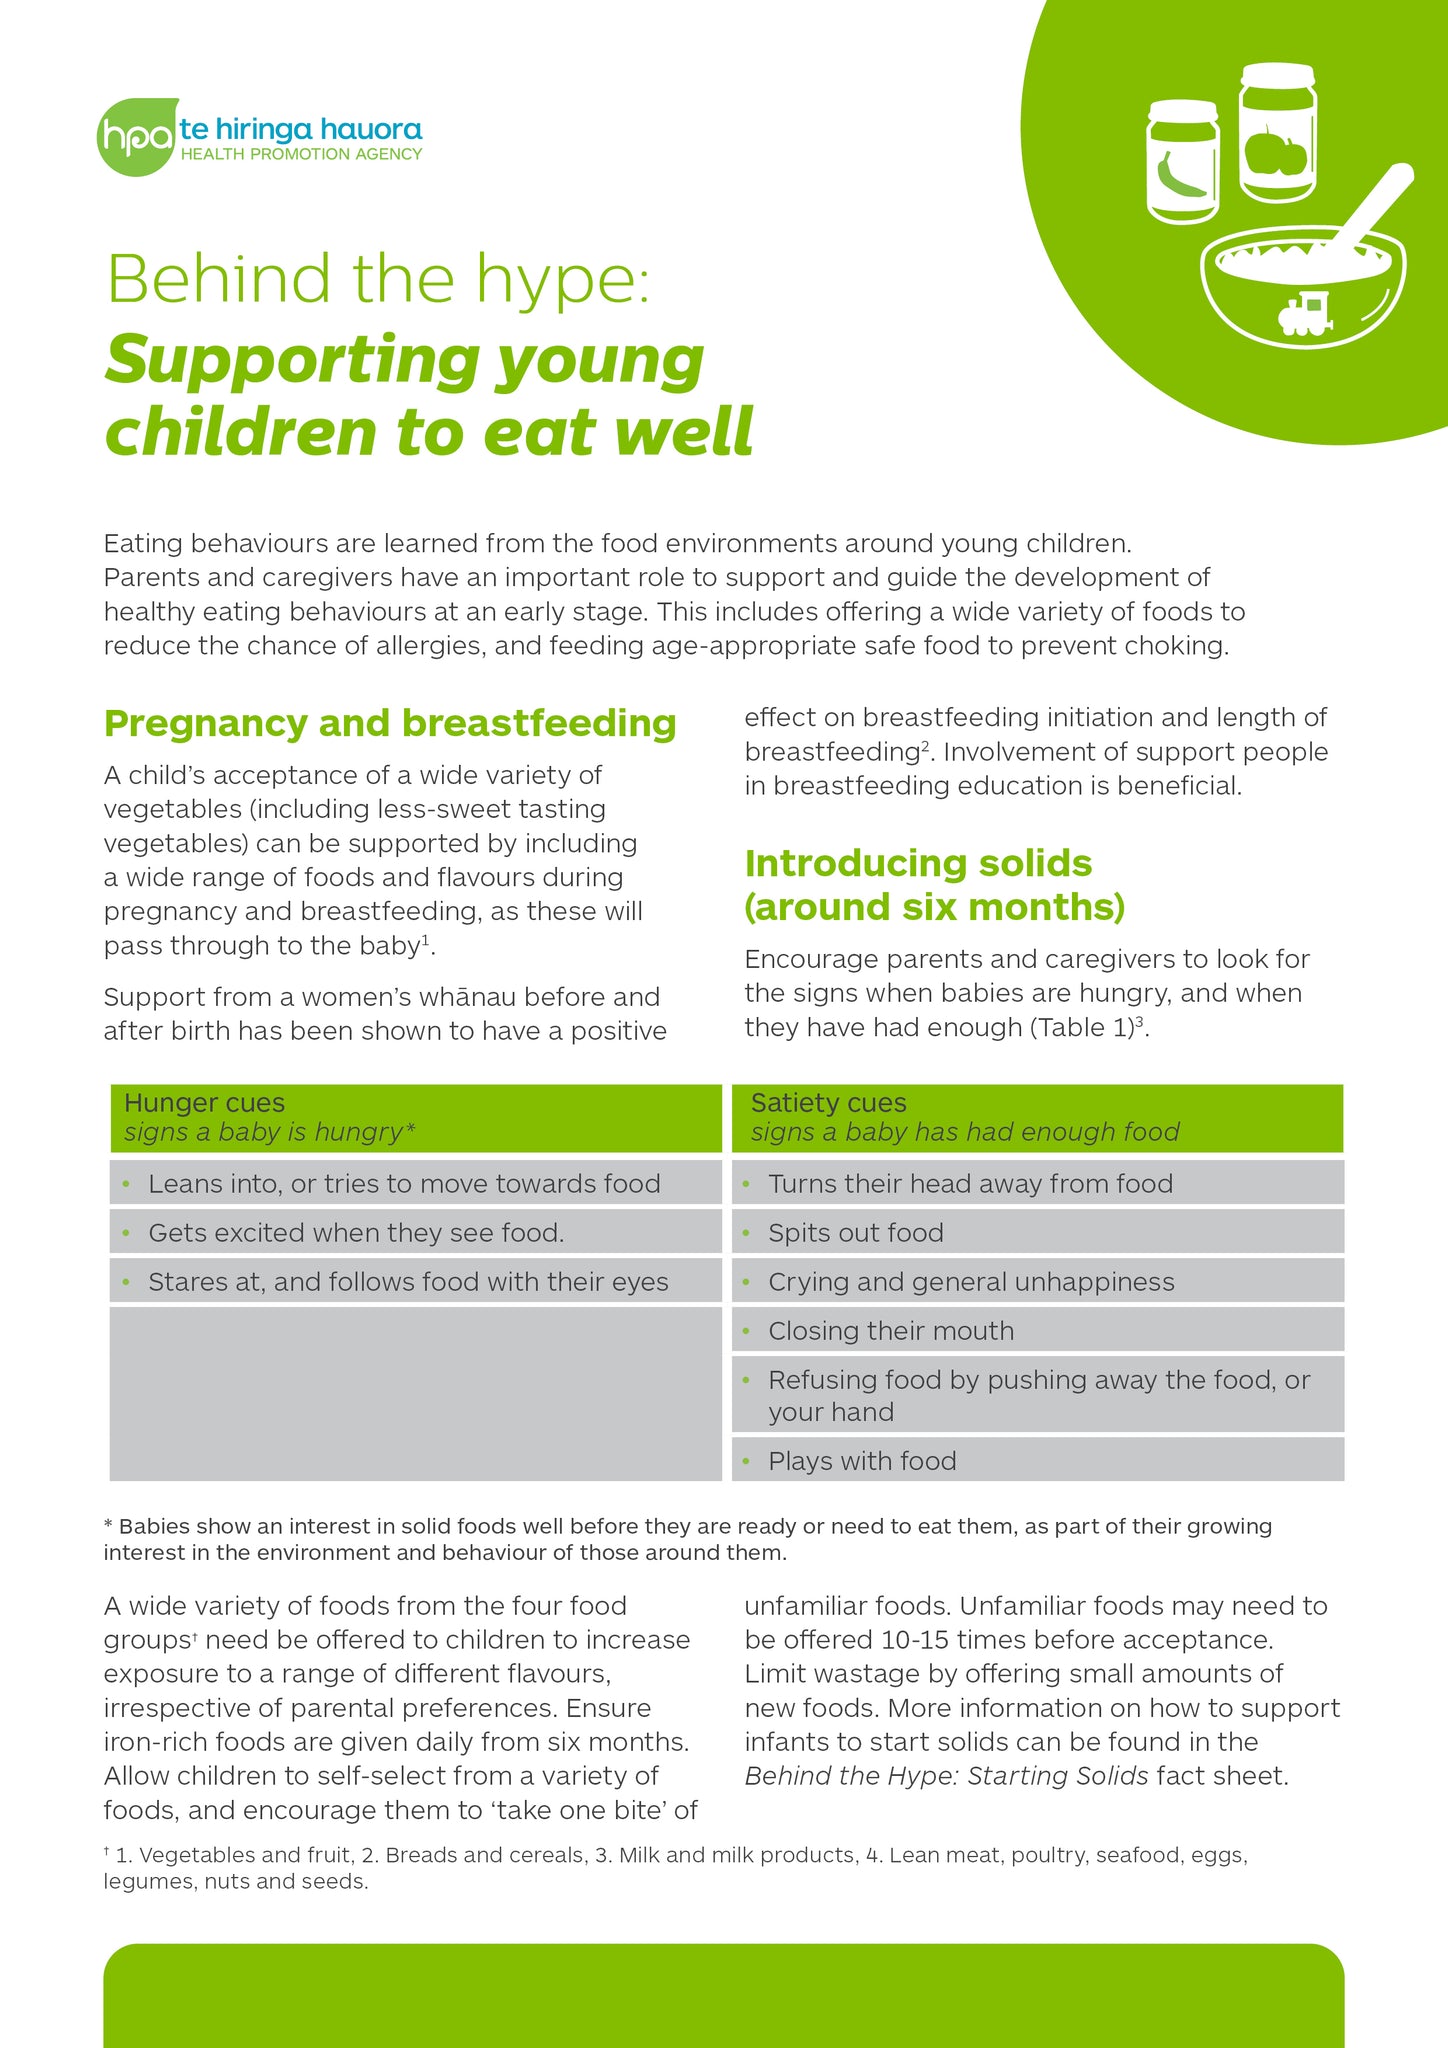 Behind the hype: Supporting young children to eat well (PDF only)